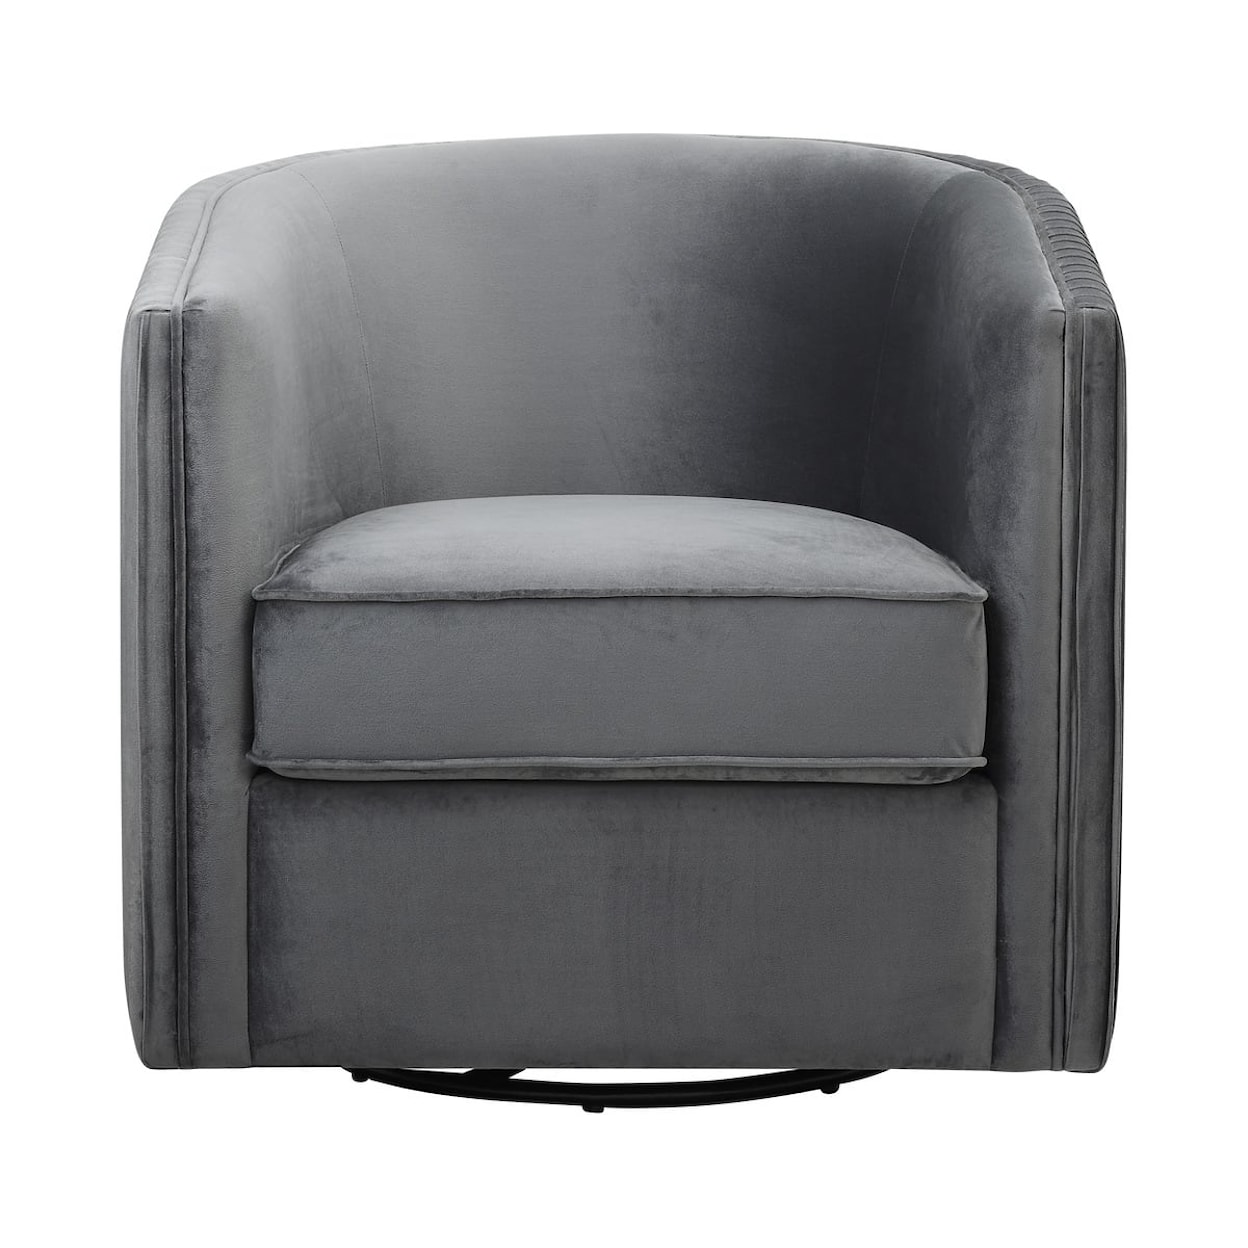 Homelegance Furniture Cecily Swivel Chair